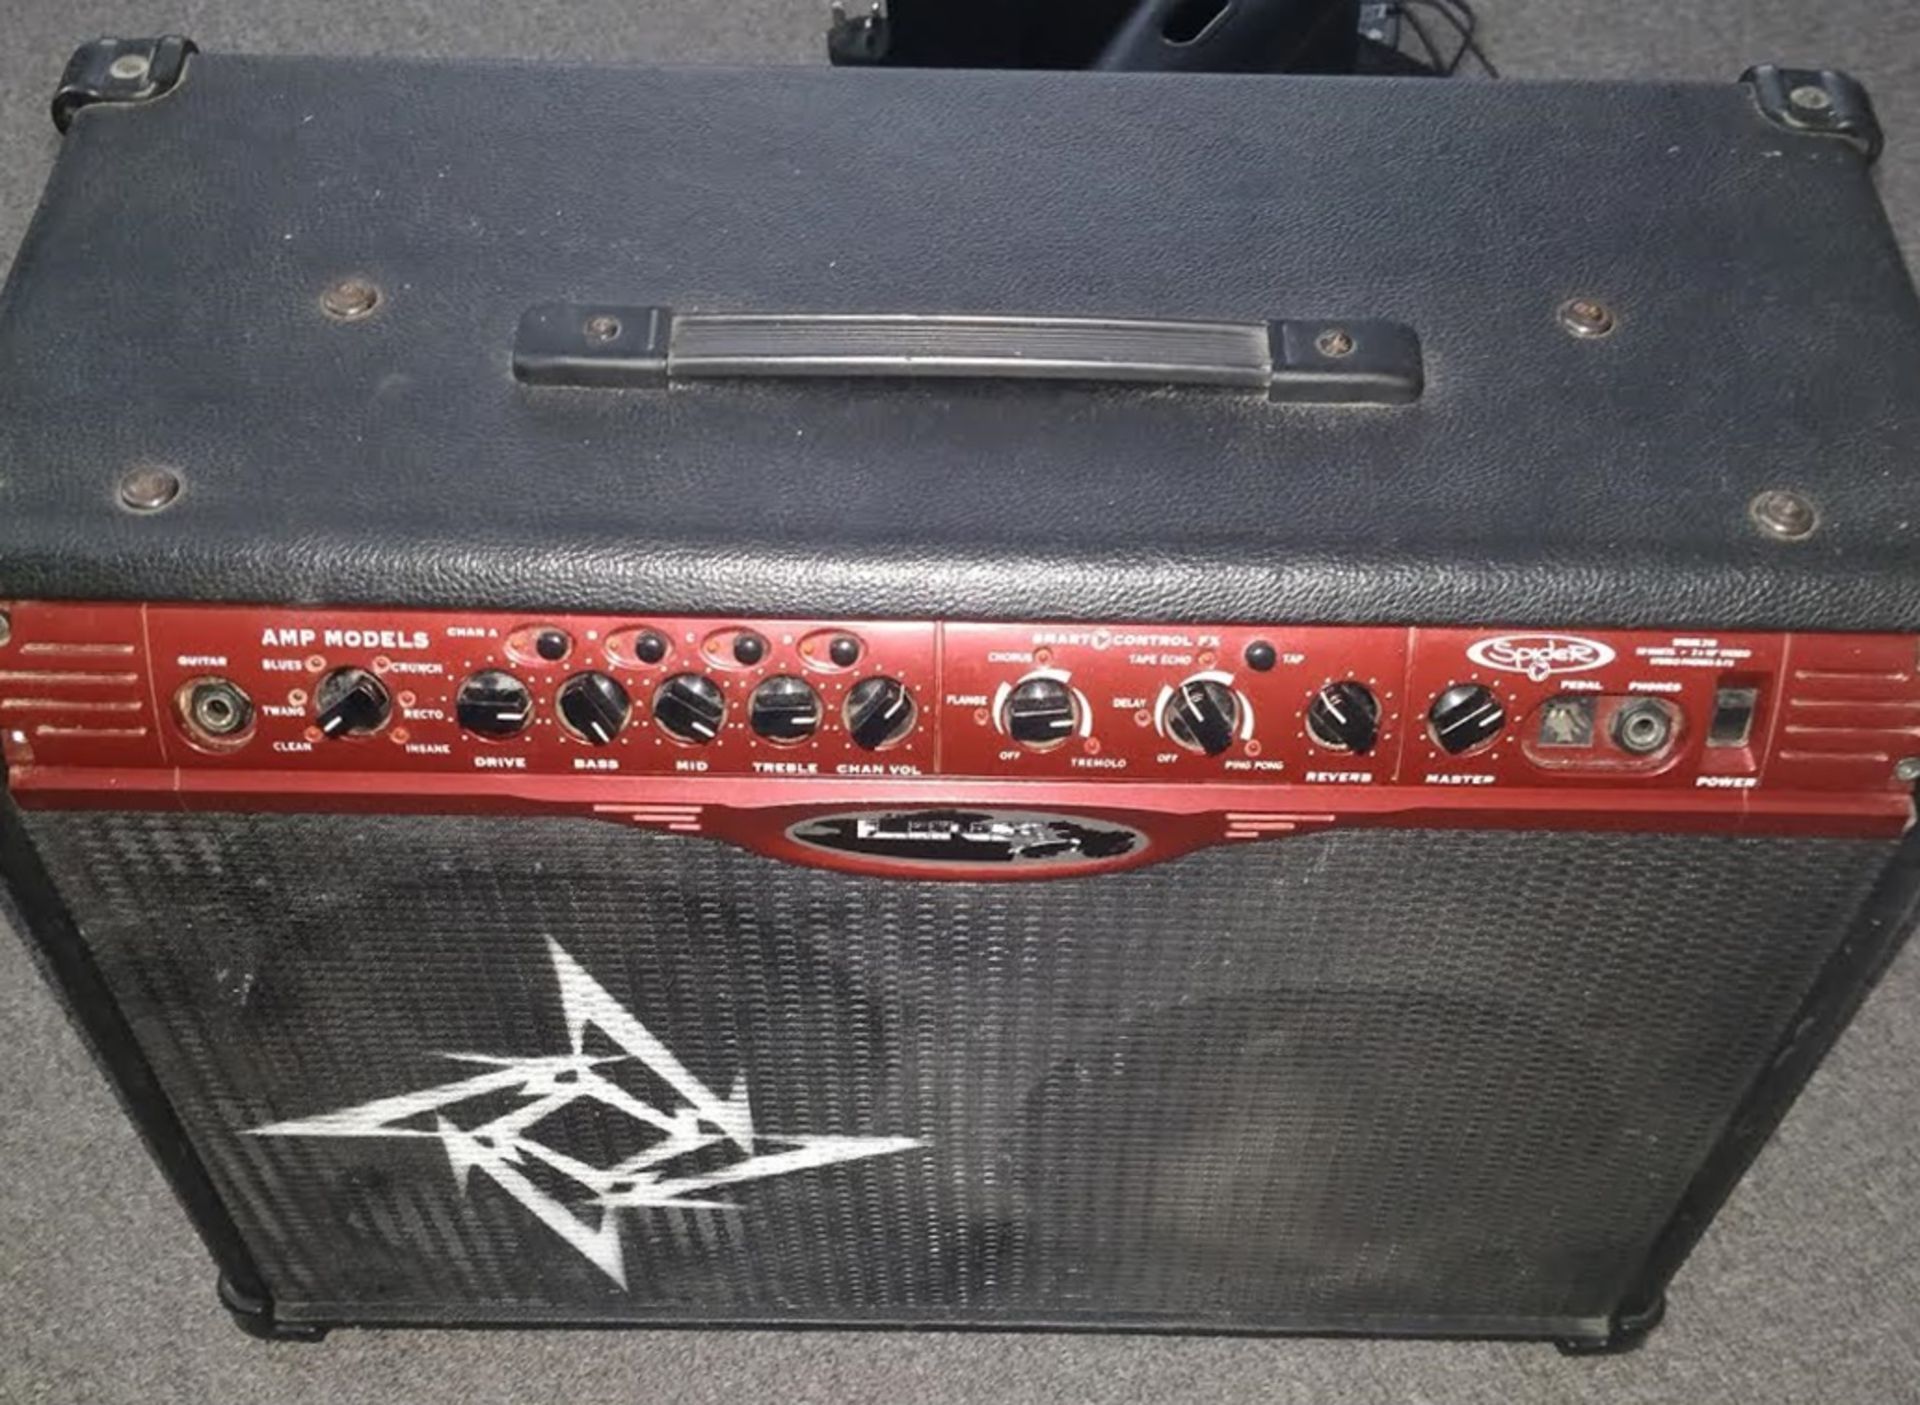 1 x Guitar Amplifier With Amp Modelling - Line 6 Spider With Celestion Speakers -Includes Cables - - Image 2 of 4